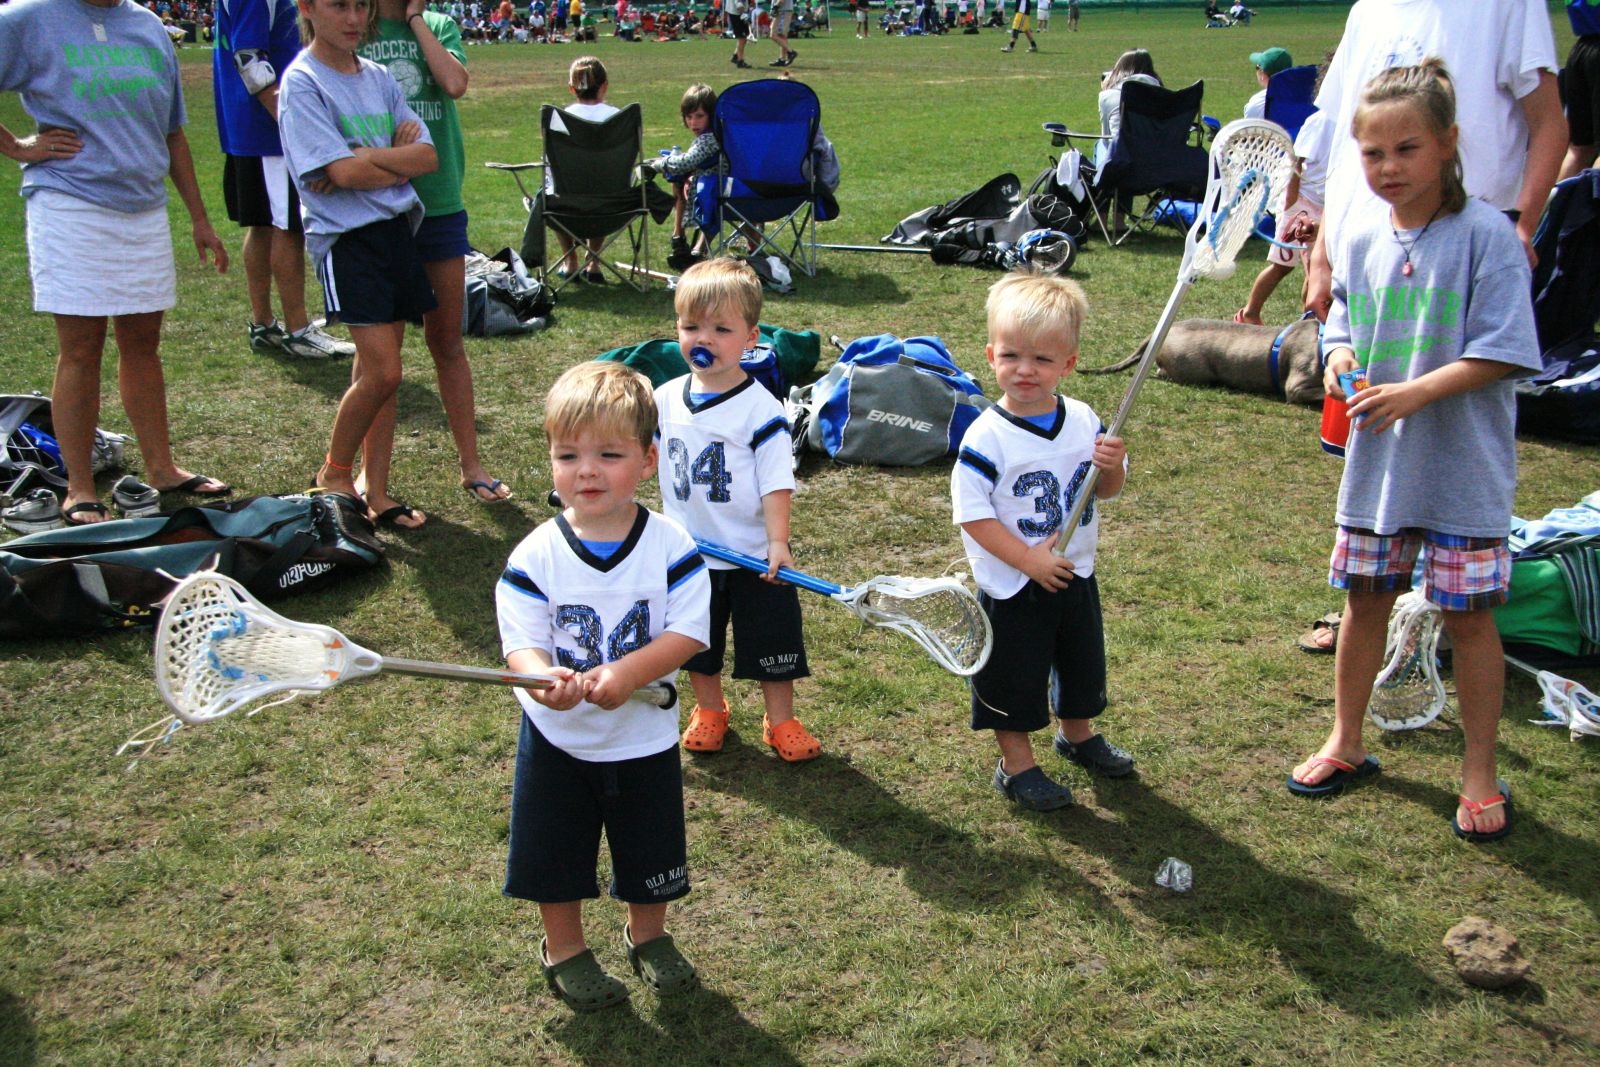 Kids are the future of lacrosse!